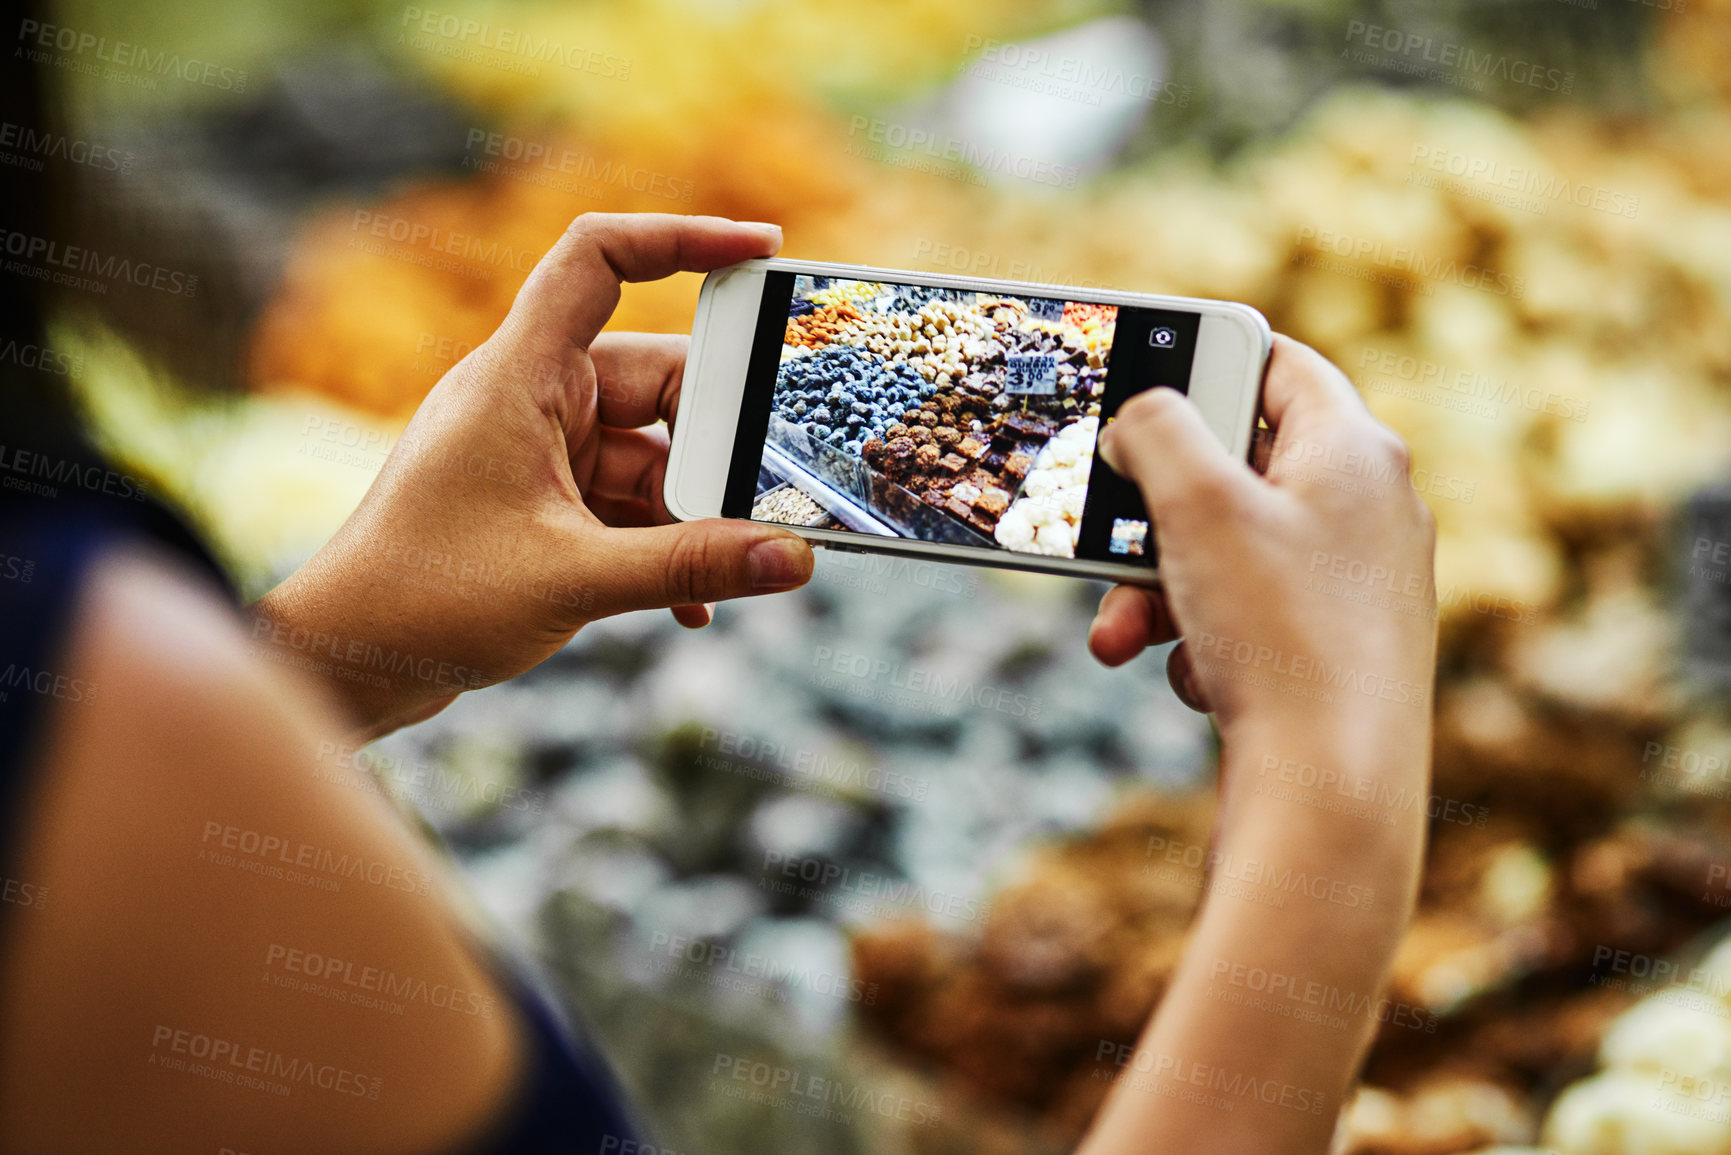 Buy stock photo Over the shoulder shot of an unrecognizable woman taking a photo of treats being sold at a market stall with her phone during the day